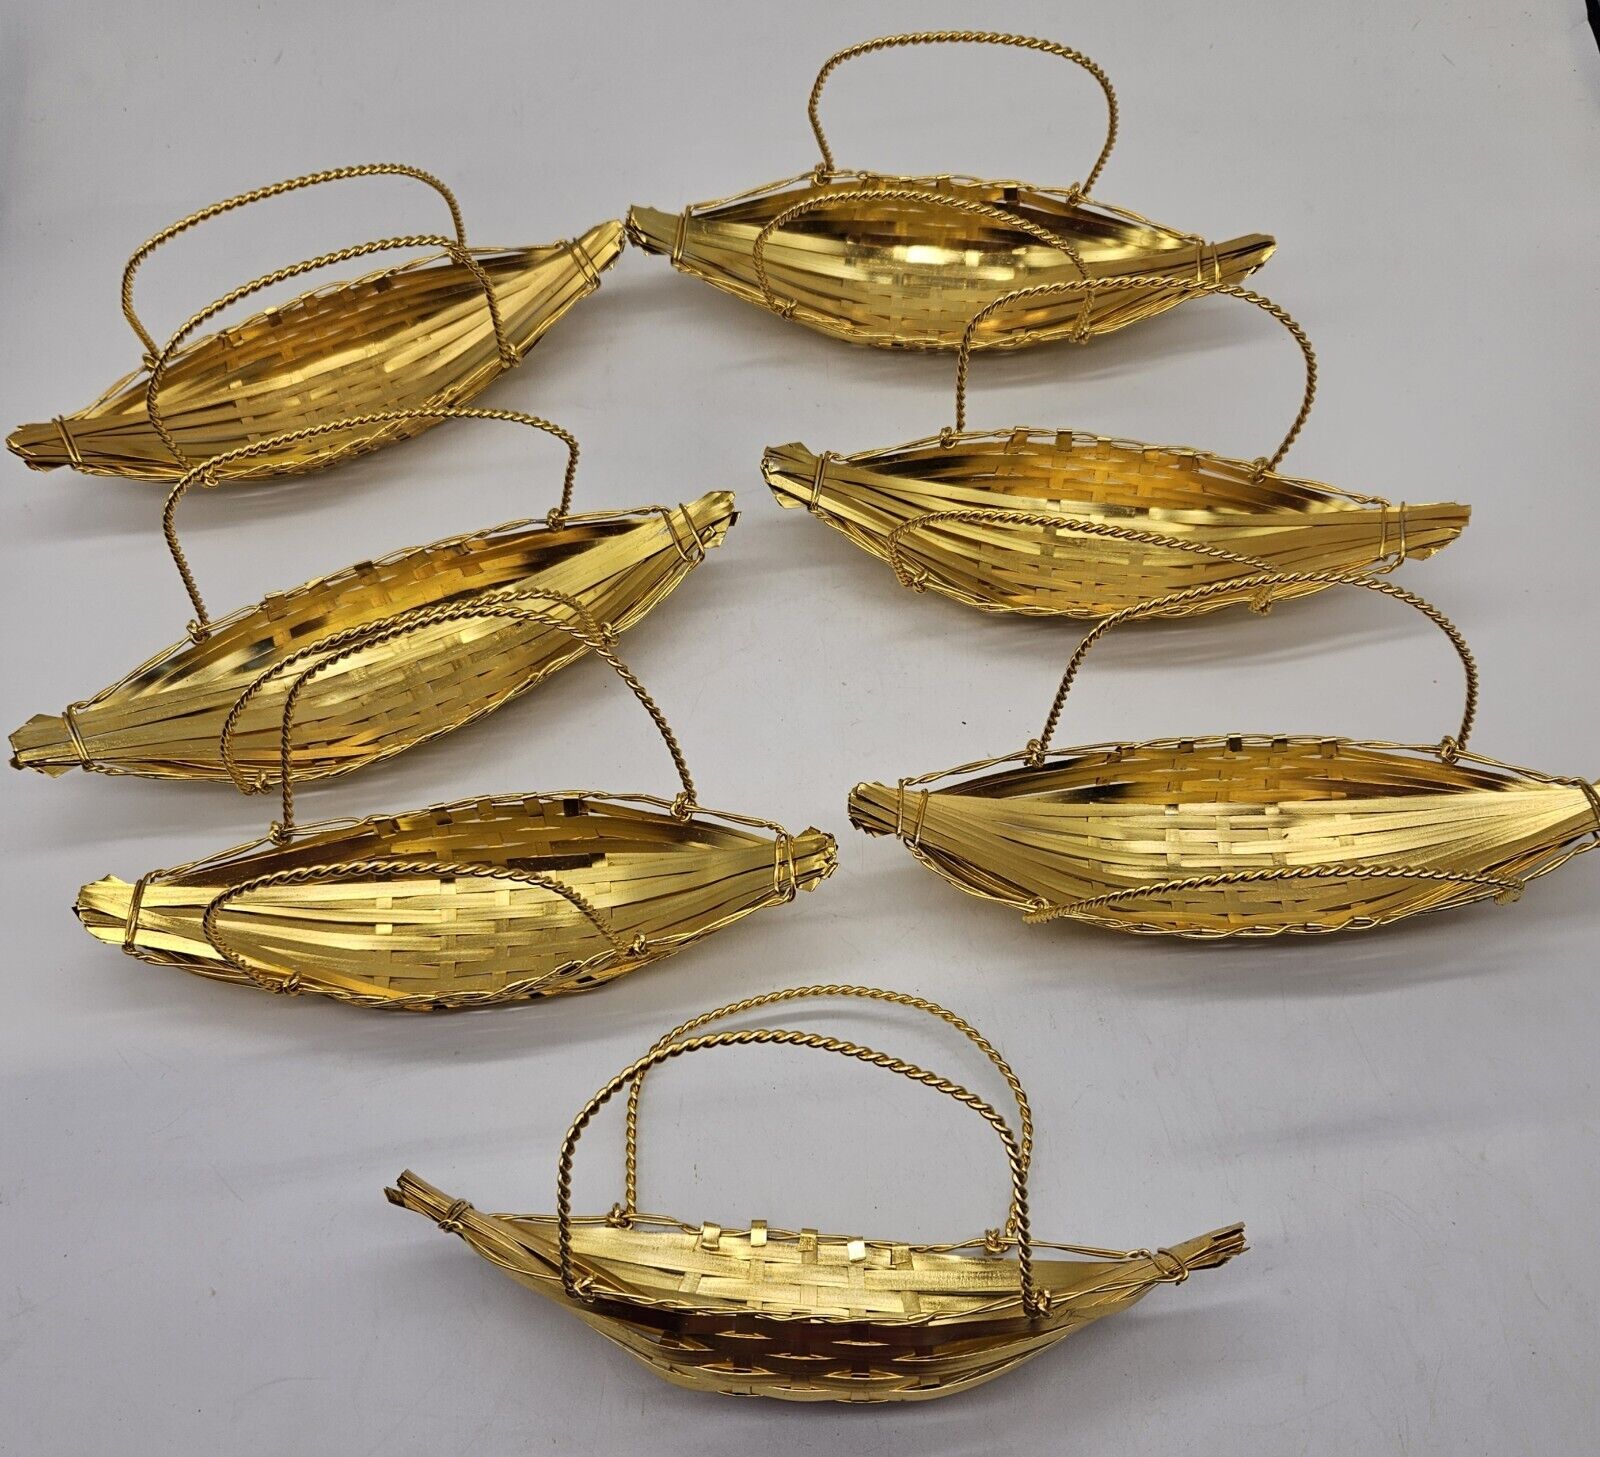 Set of 7 Gold Tone Metal Boat-Shaped Baskets Candy Nut Sushi Holders